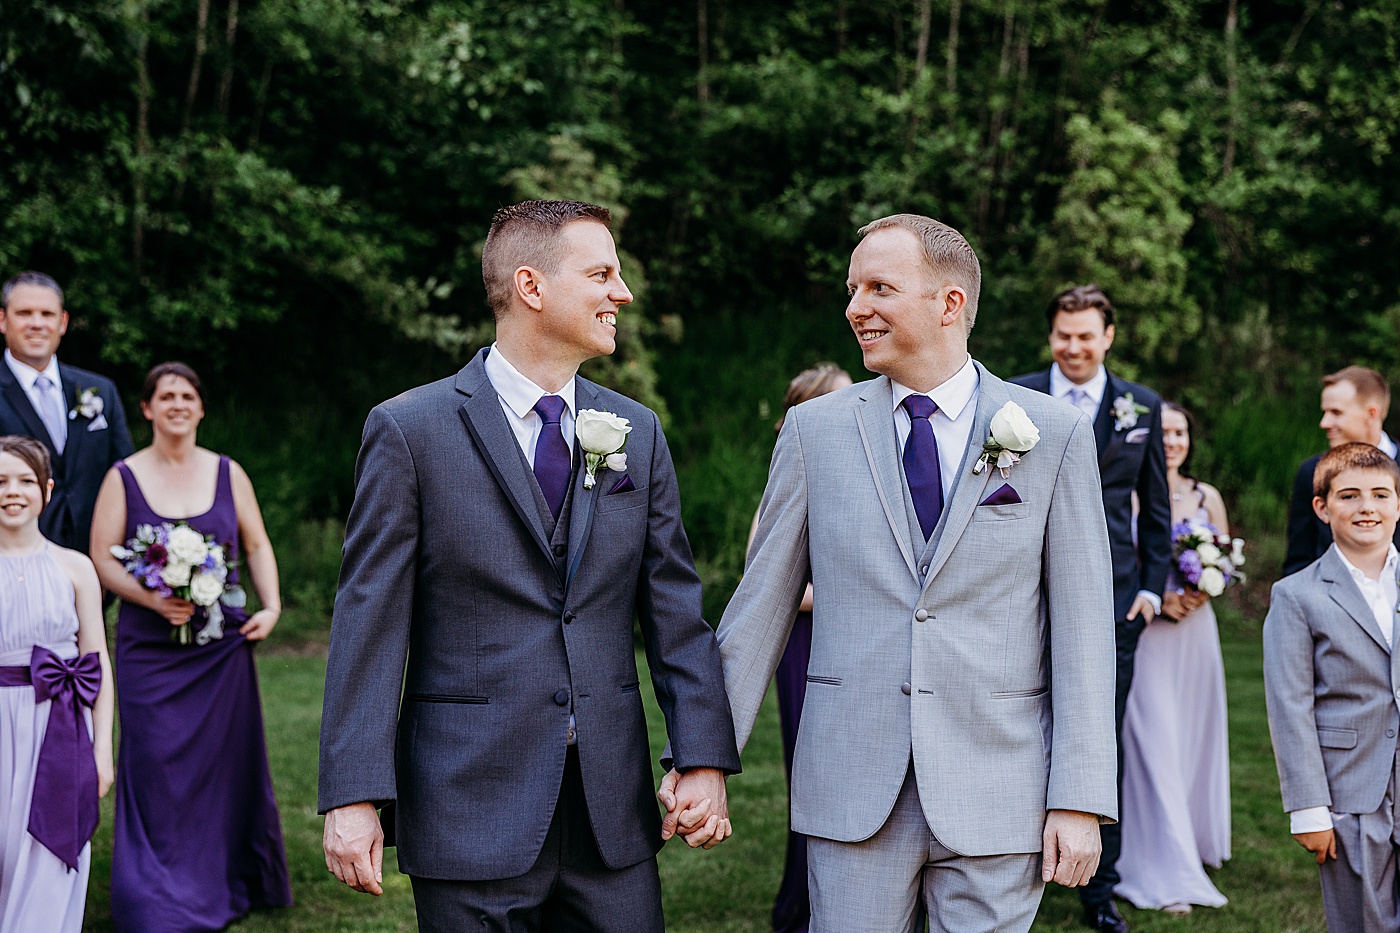 Grooms with wedding part at Sanders Estate | Megan Montalvo Photography